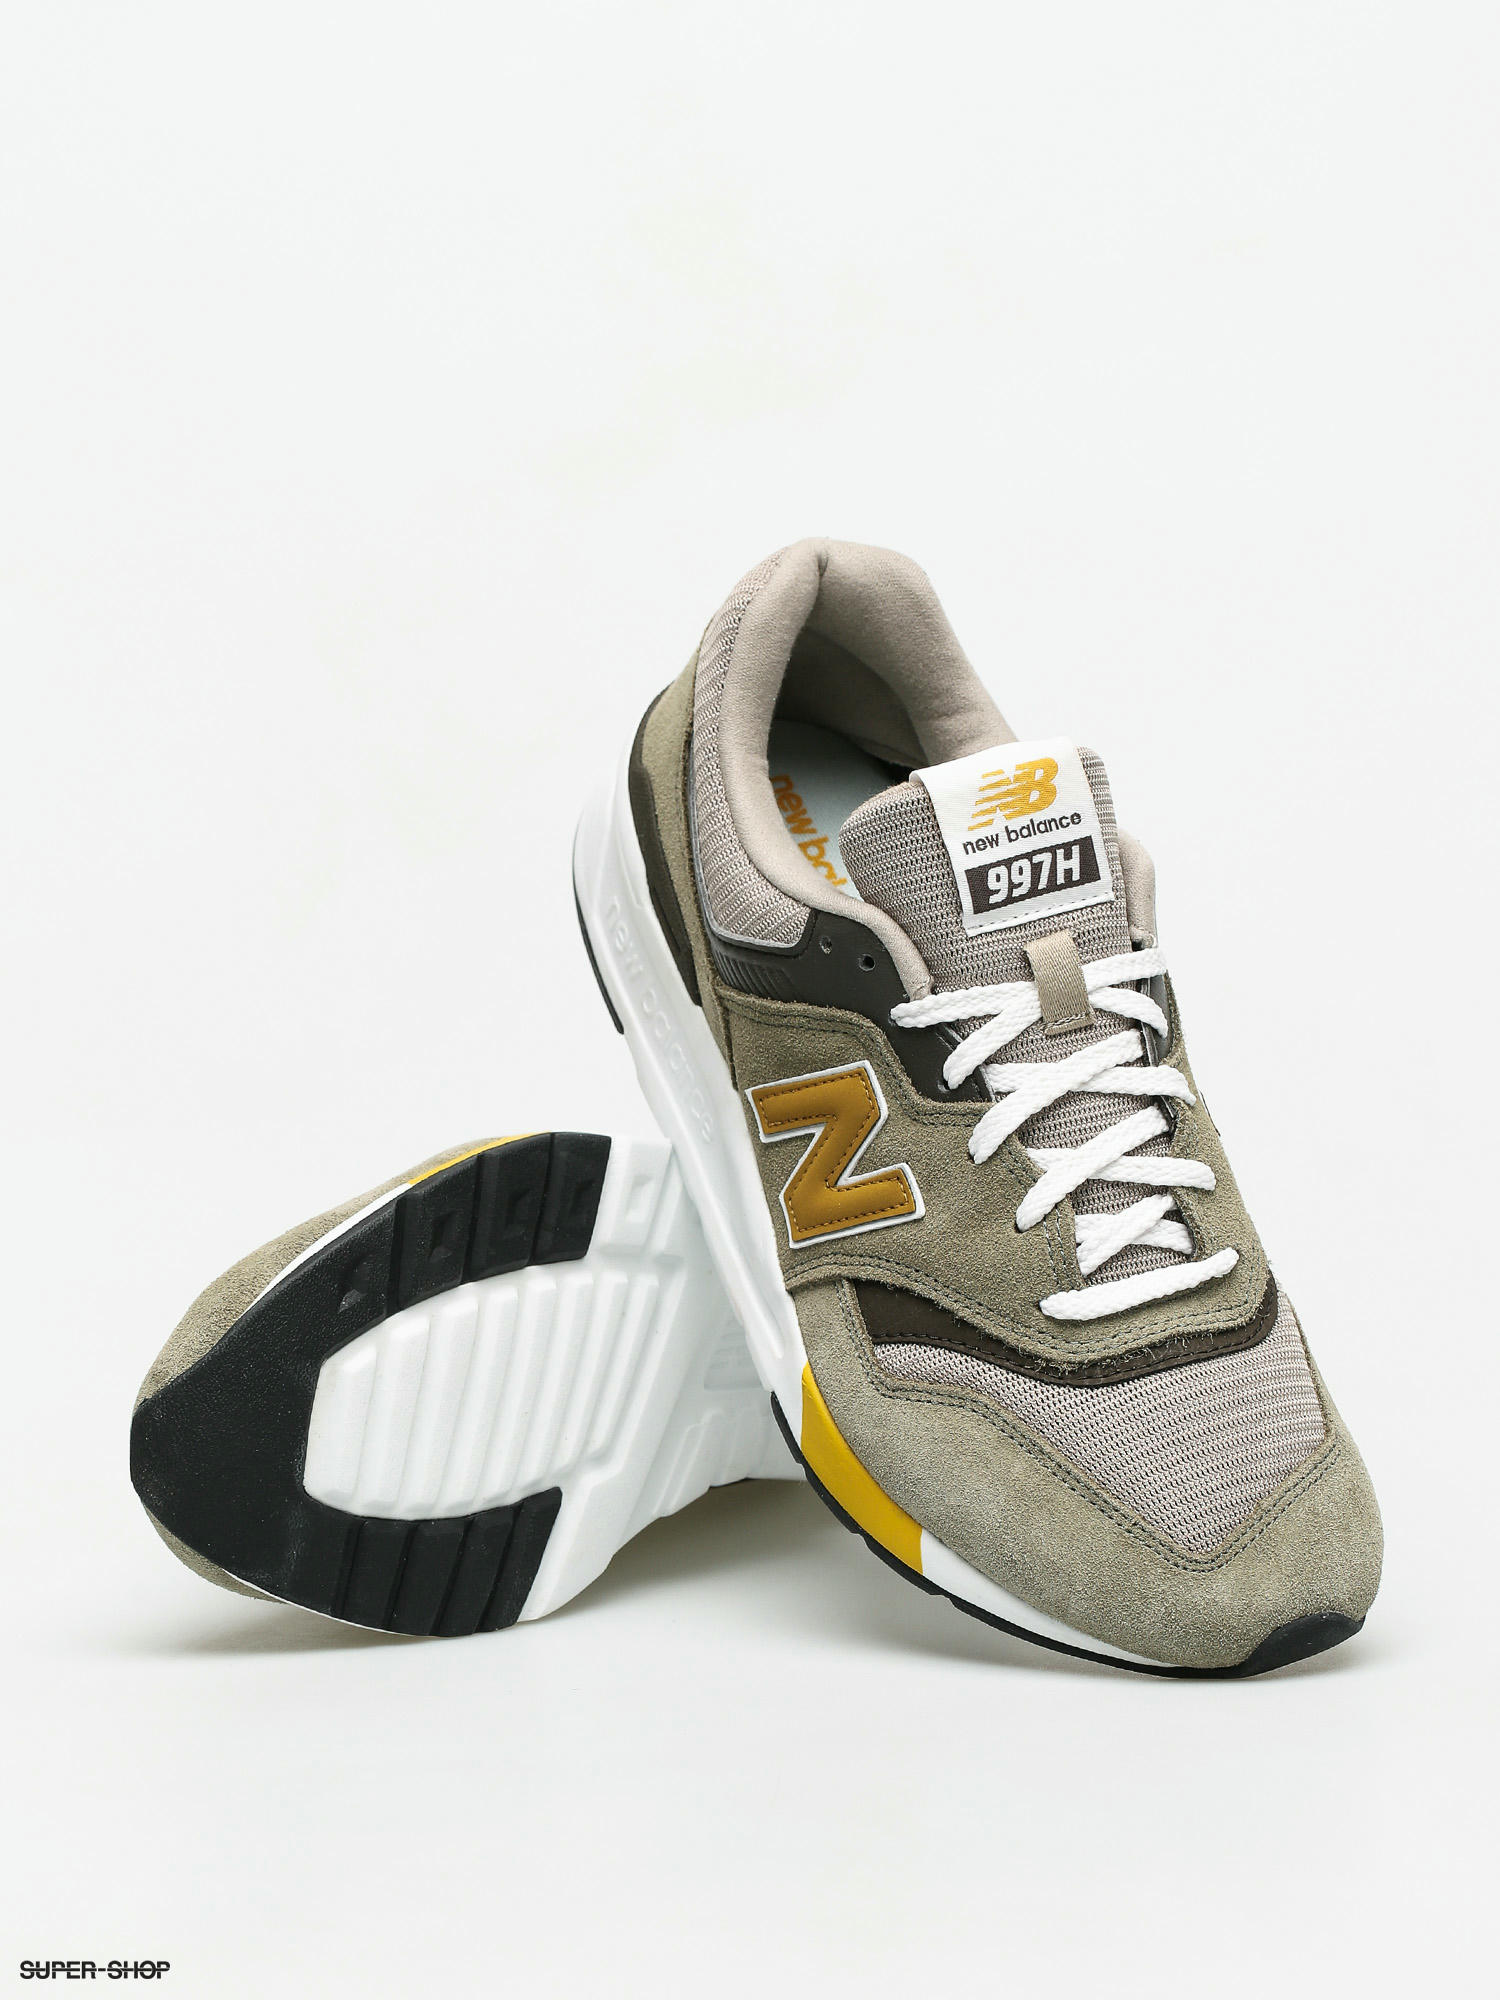 New Balance 997 Shoes (green/gold)